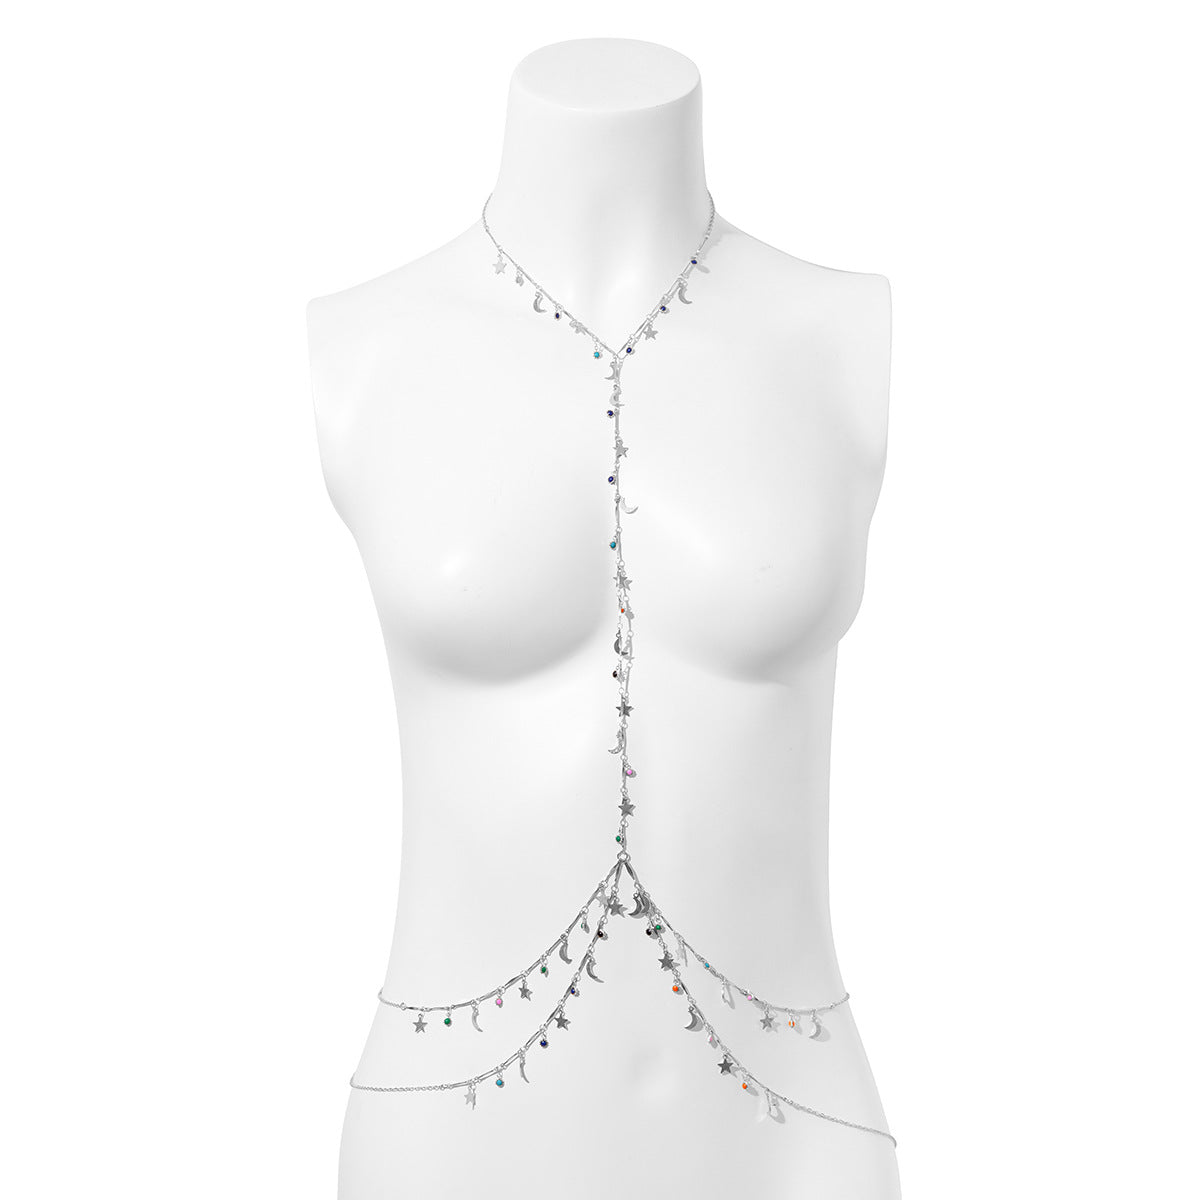 Alluring Vienna Verve Female Jewelry Set for Neck, Waist, and Body